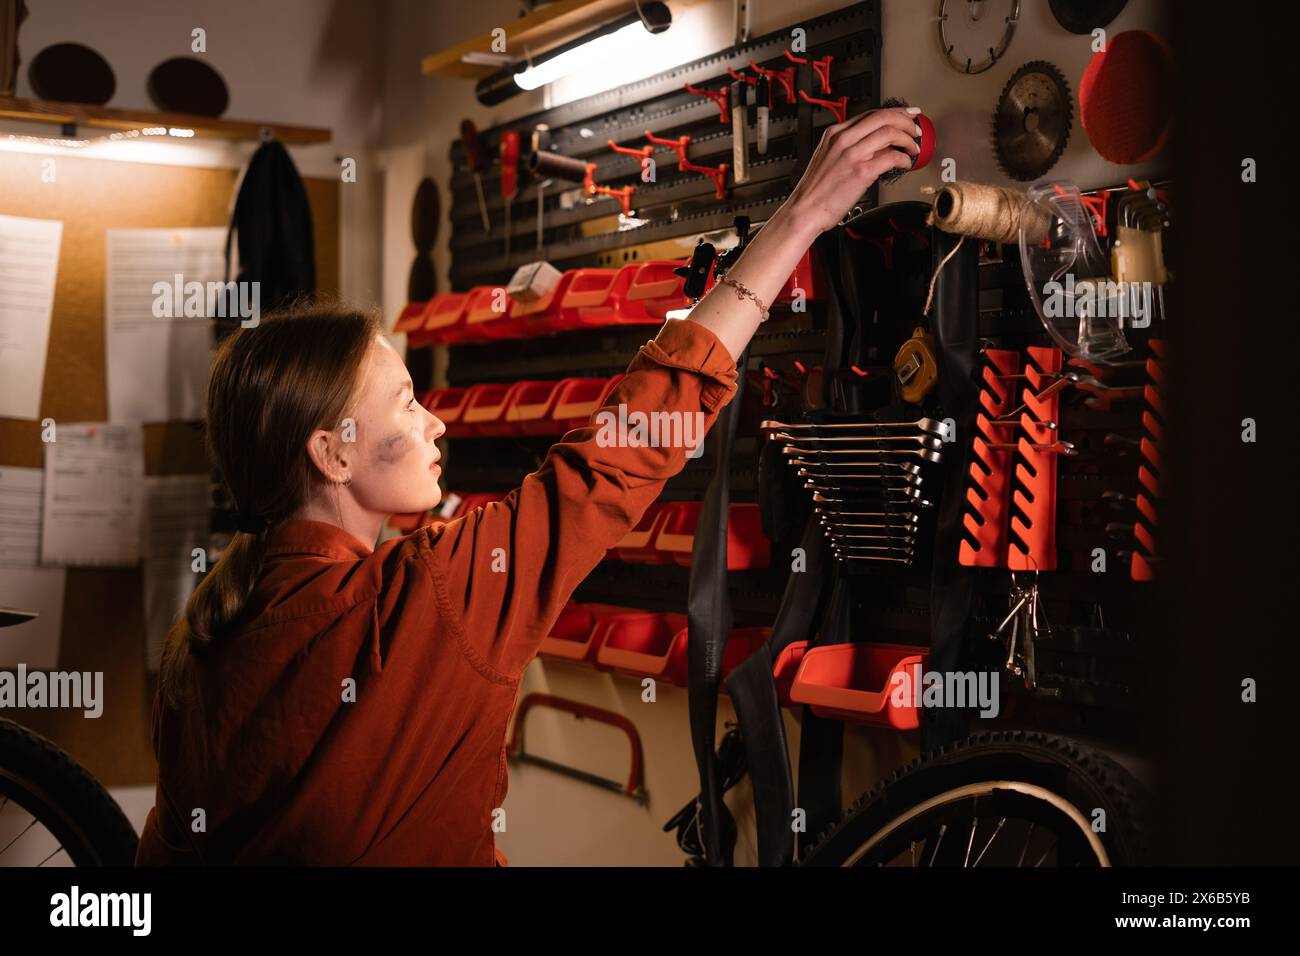 Portrait of woman mechanic in garage or workshop inspecting tools during the bike maintenance Stock Photo